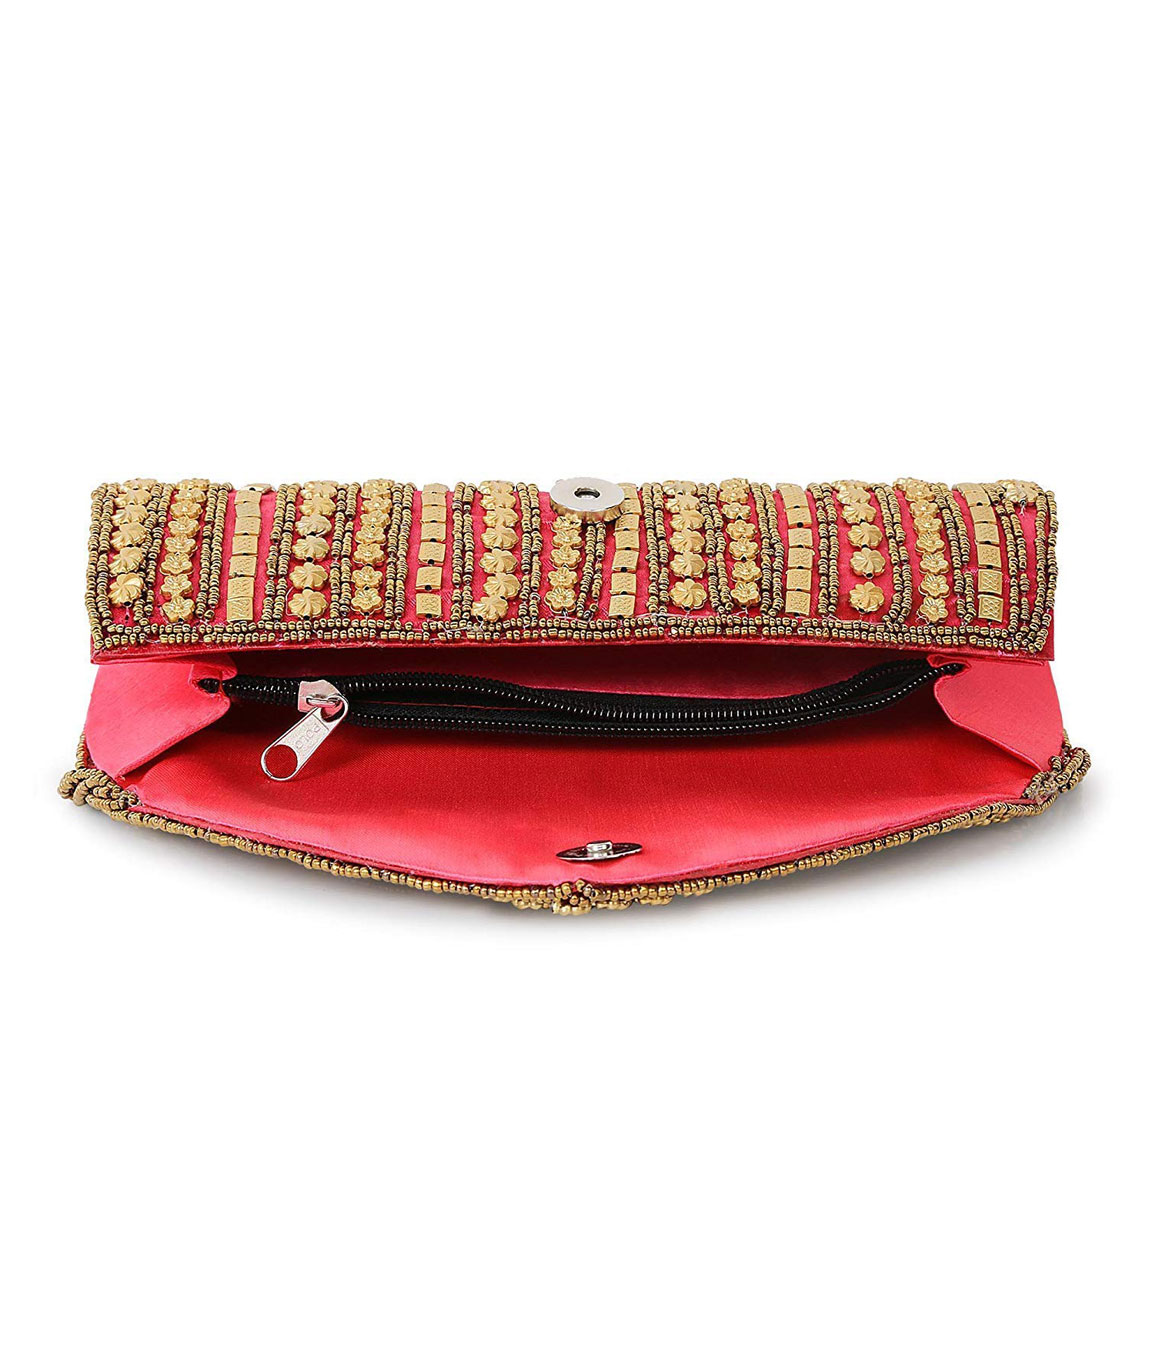 Buy PURSEO Party, Women's/Girls Casual Red Clutch Bag Purse Handbag Wedding  Bridal Gathering Functions (red) Online at Best Prices in India - JioMart.